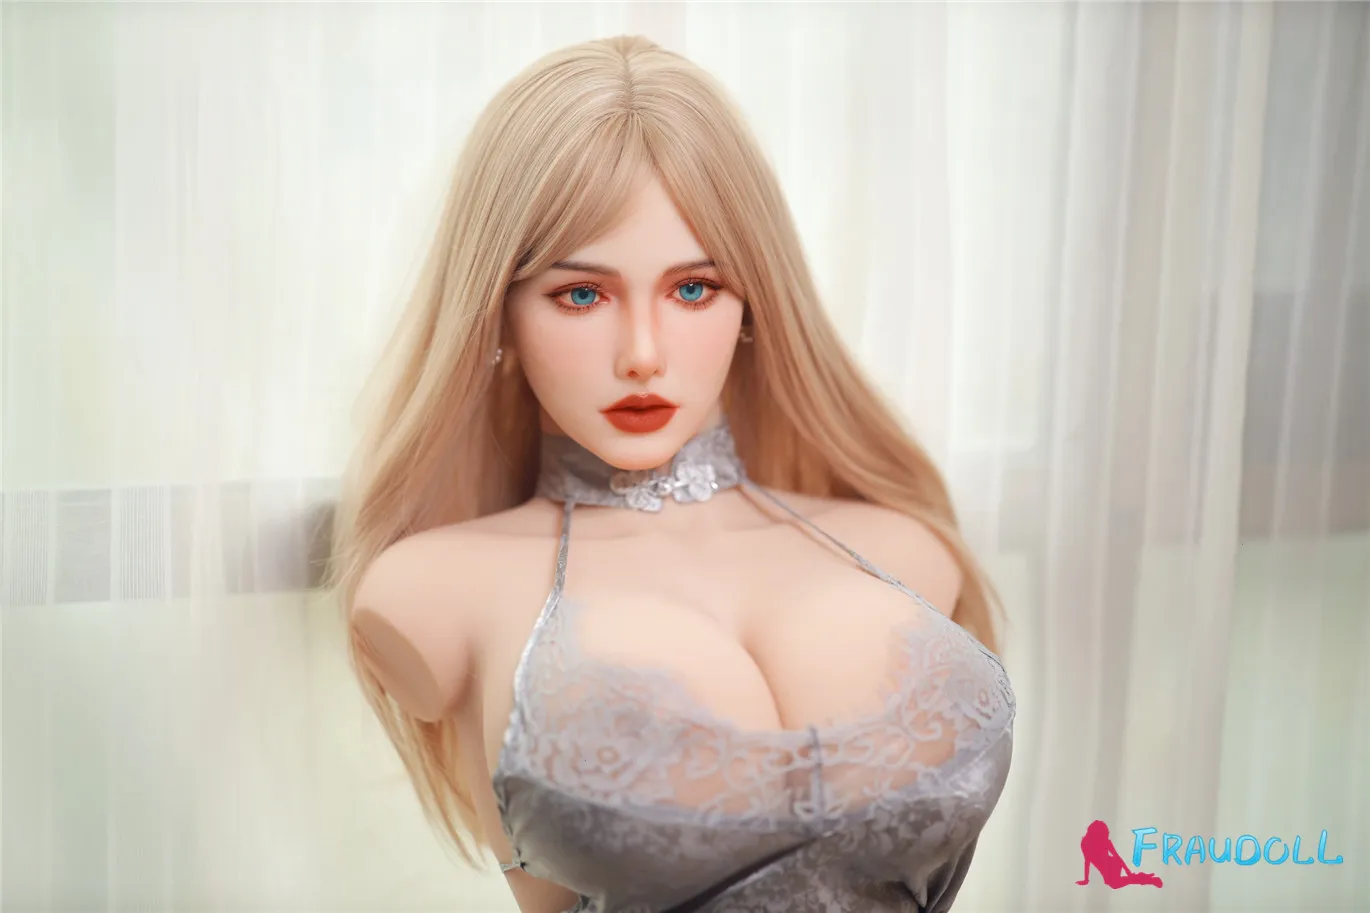 I-Cup Real Doll Liebespuppen Andernach